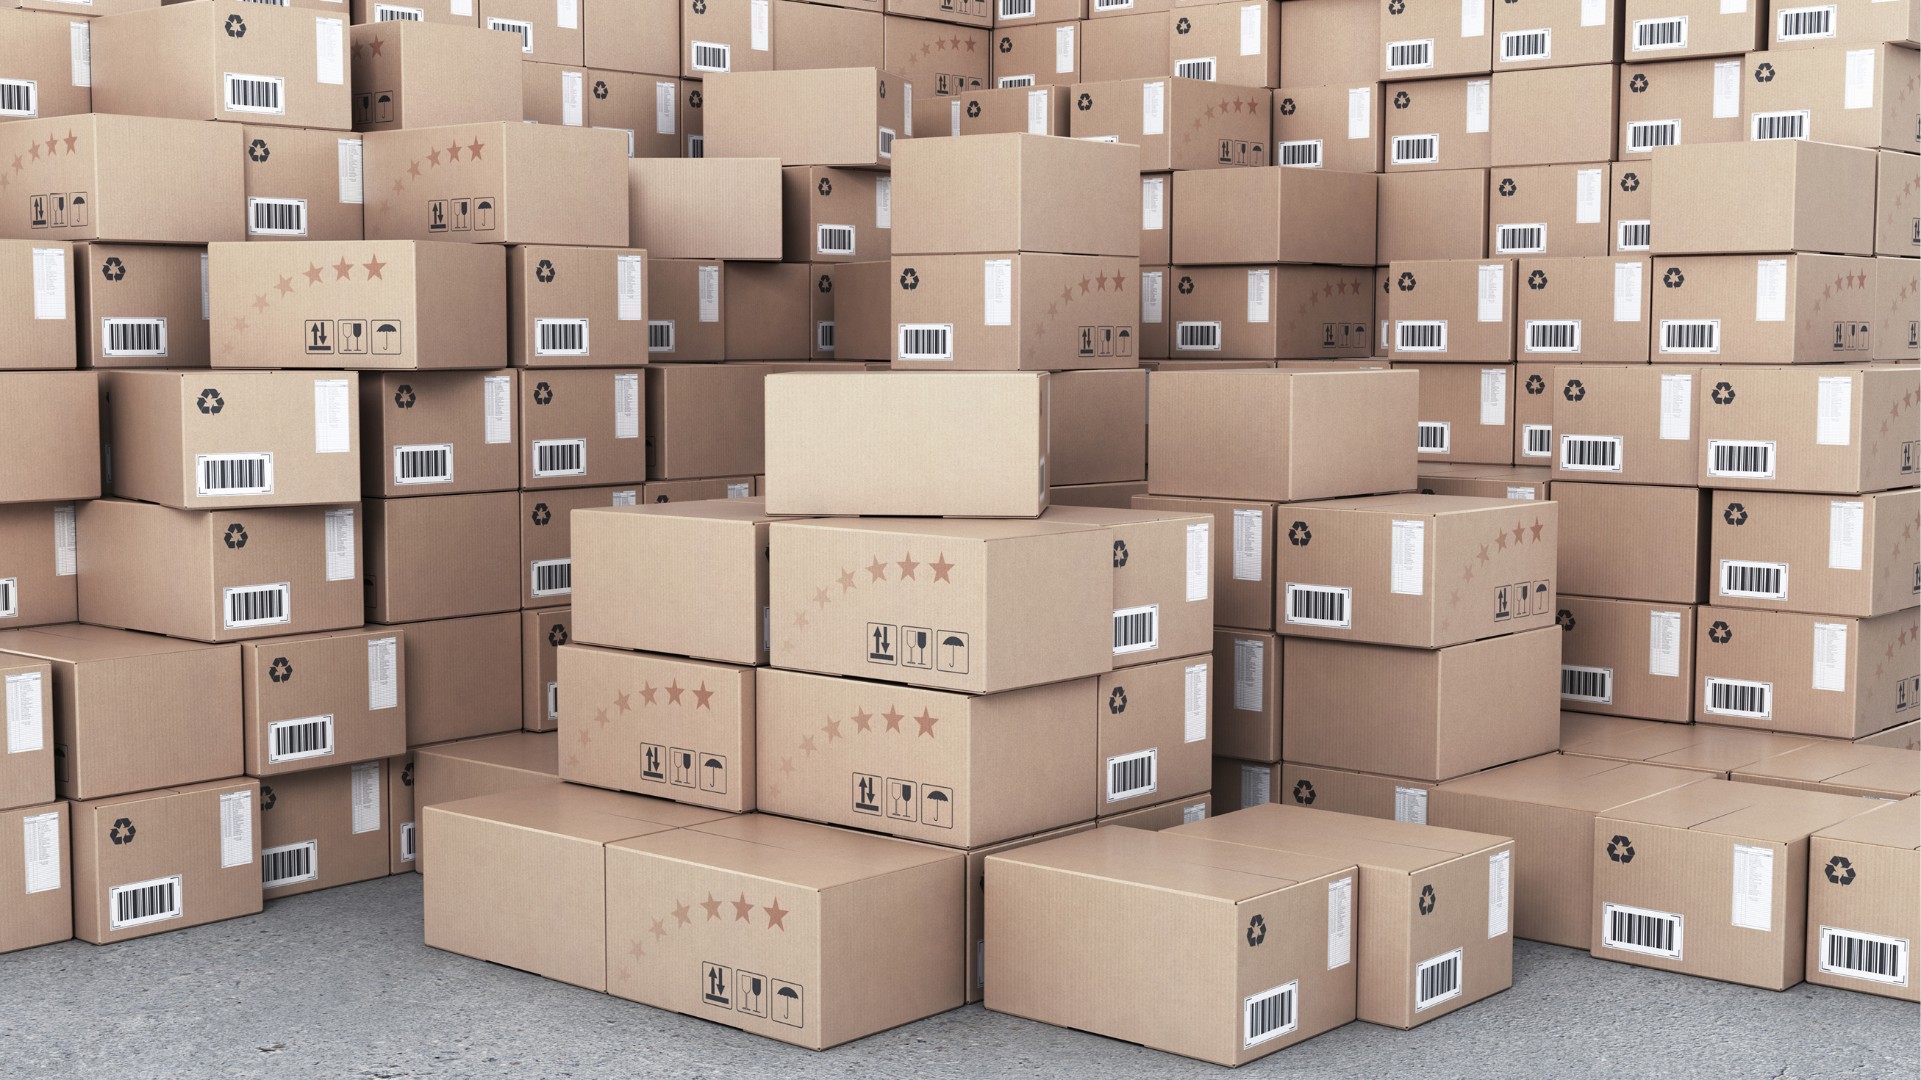 Reduce inventories along the supply chain